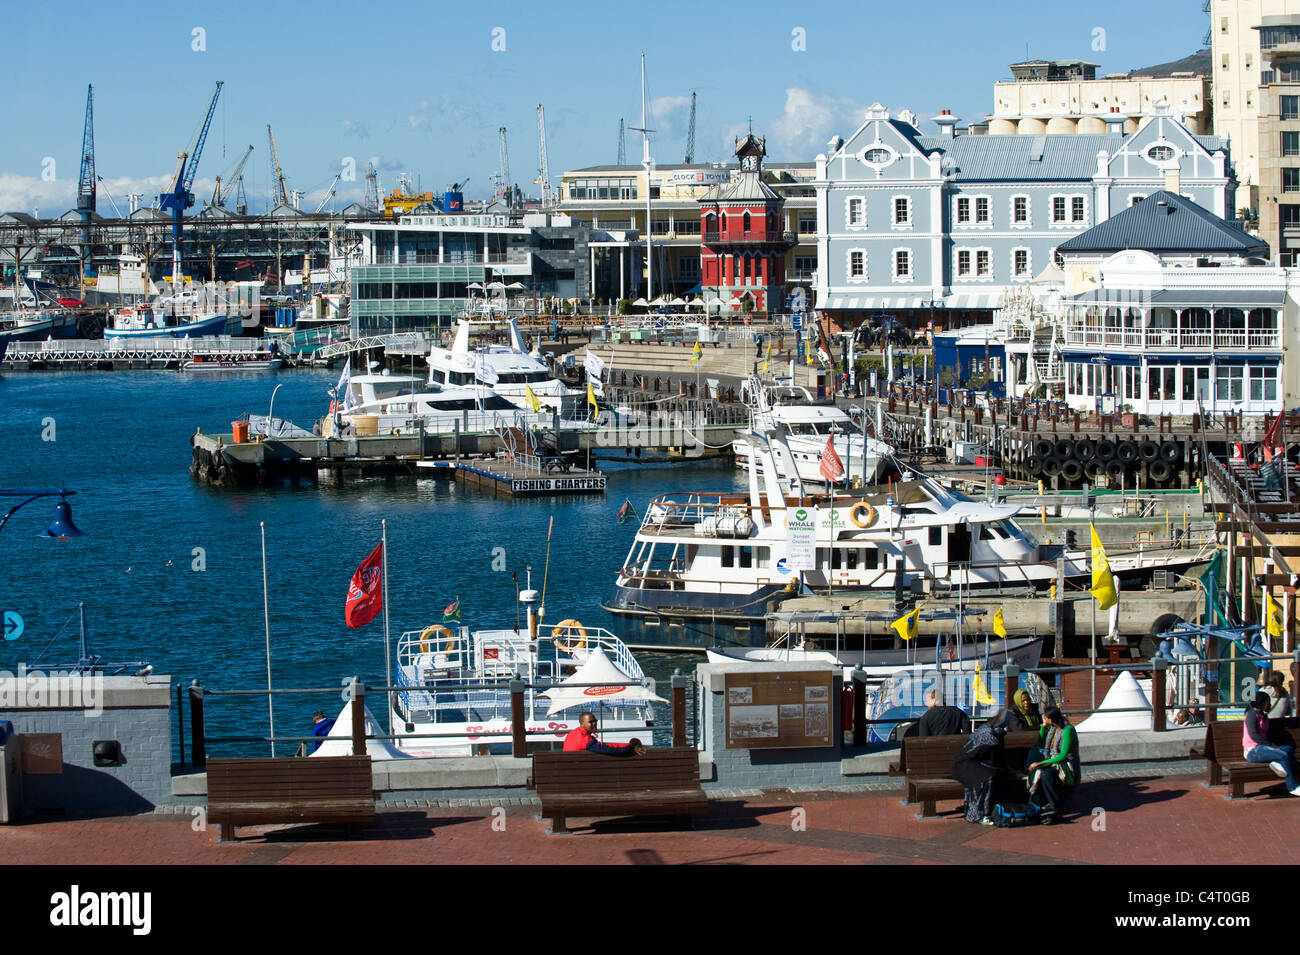 Pier and boats at V&A Waterfront in Cape Town South Africa Stock Photo